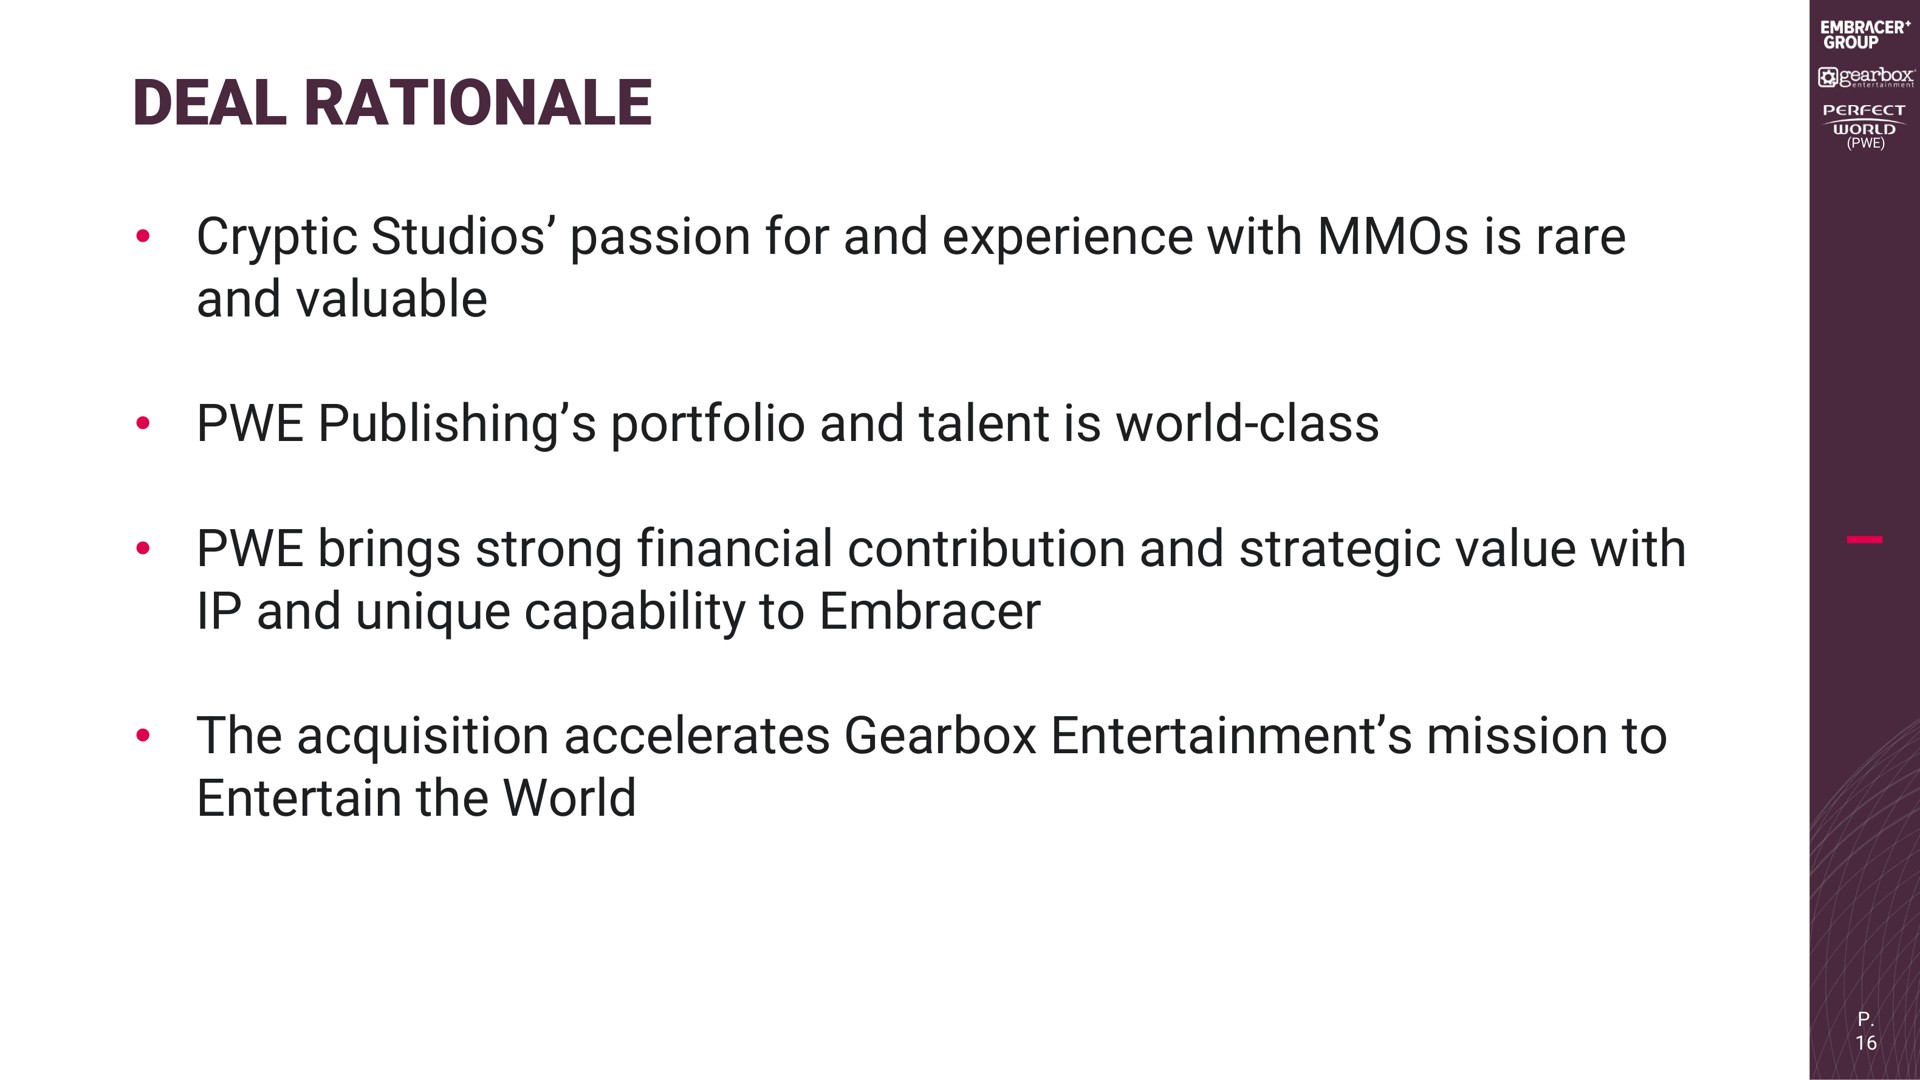 deal rationale cryptic studios passion for and experience with is rare and valuable publishing portfolio and talent is world class brings strong financial contribution and strategic value with and unique capability to embracer the acquisition accelerates gearbox entertainment mission to entertain the world | Embracer Group